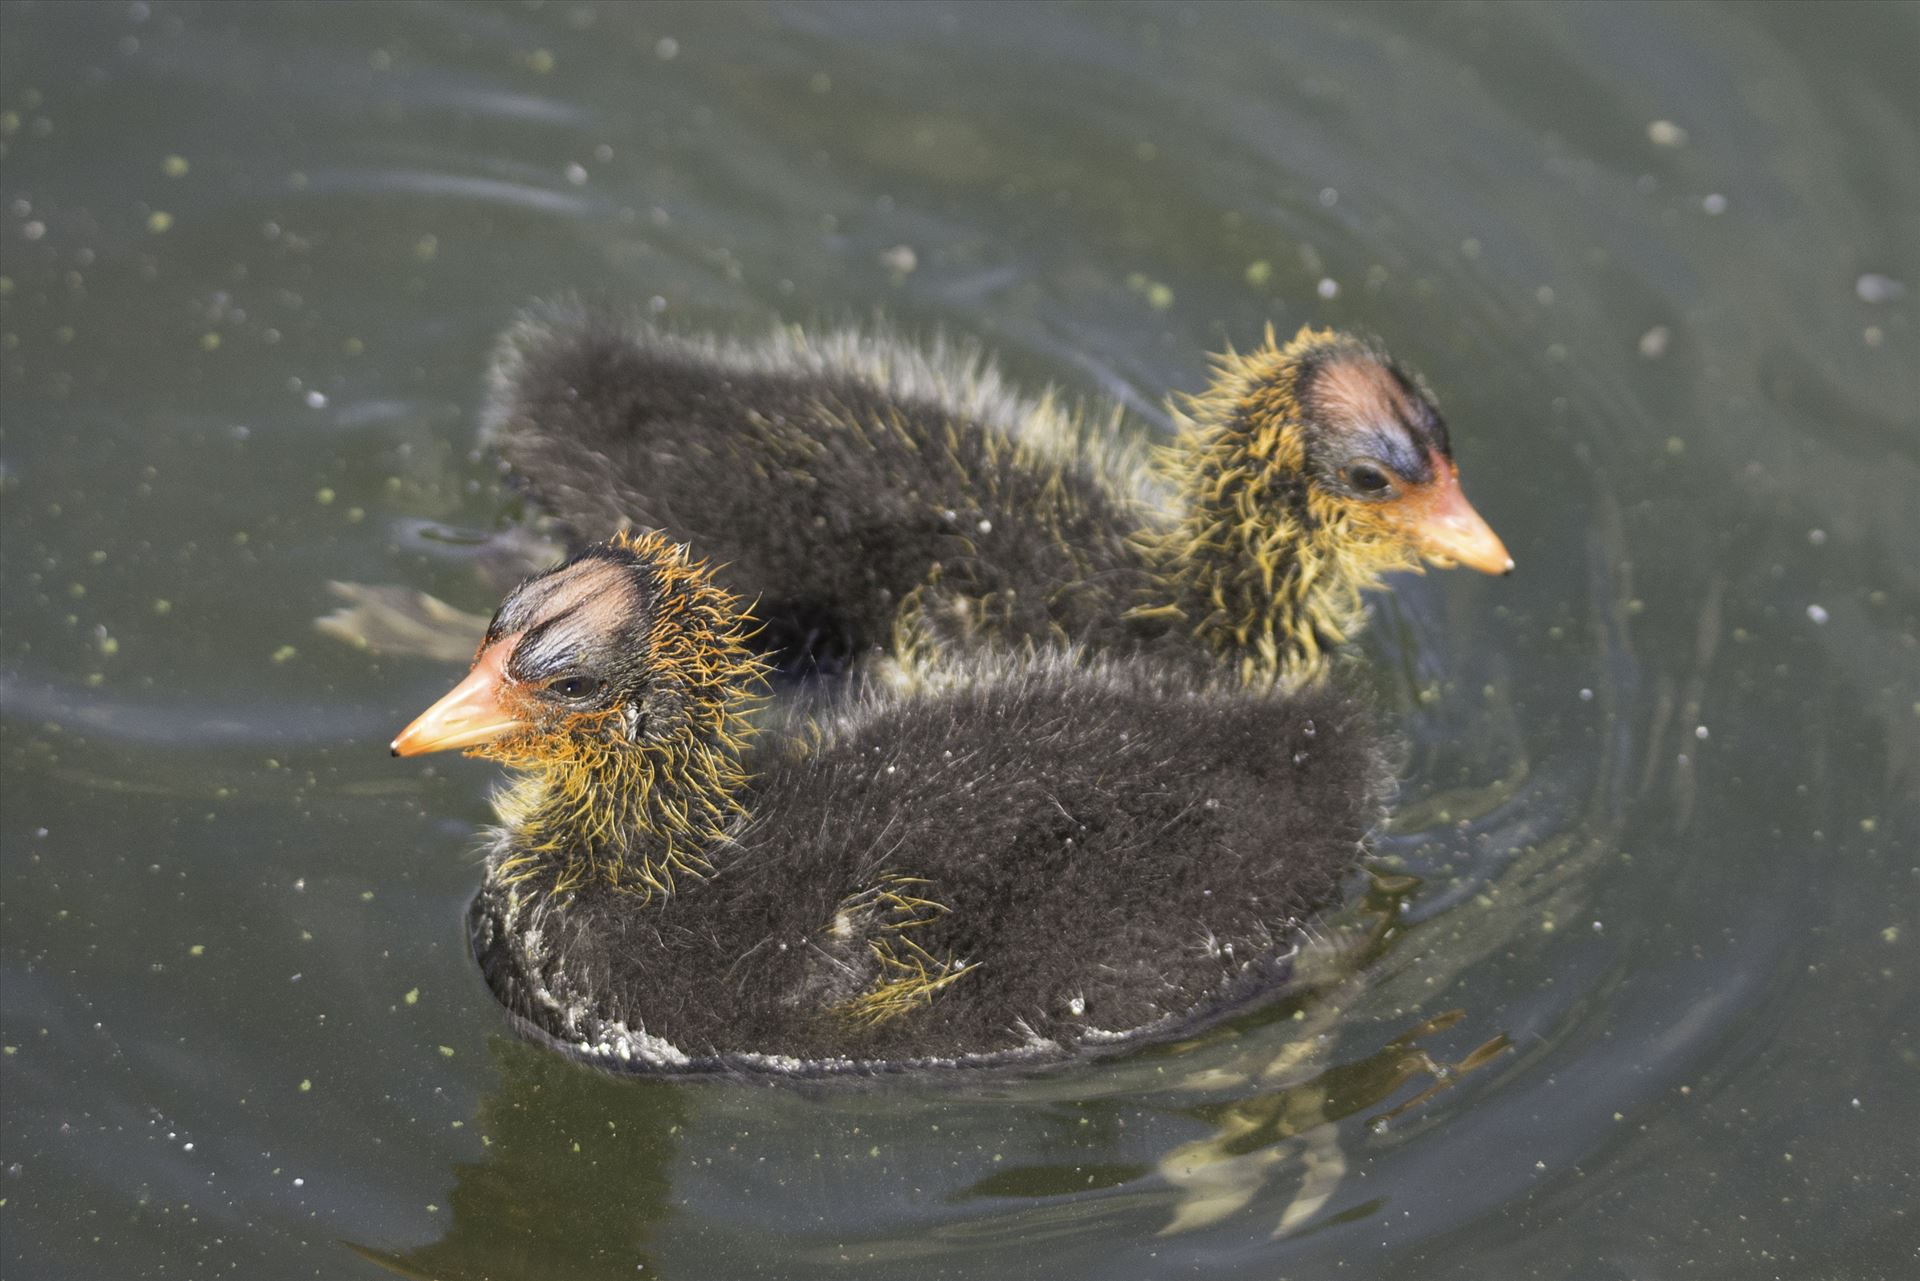 Coot Chicks - Two American Coot Chicks, just a few days old, swim in Newark Lake by Denise Buckley Crawford